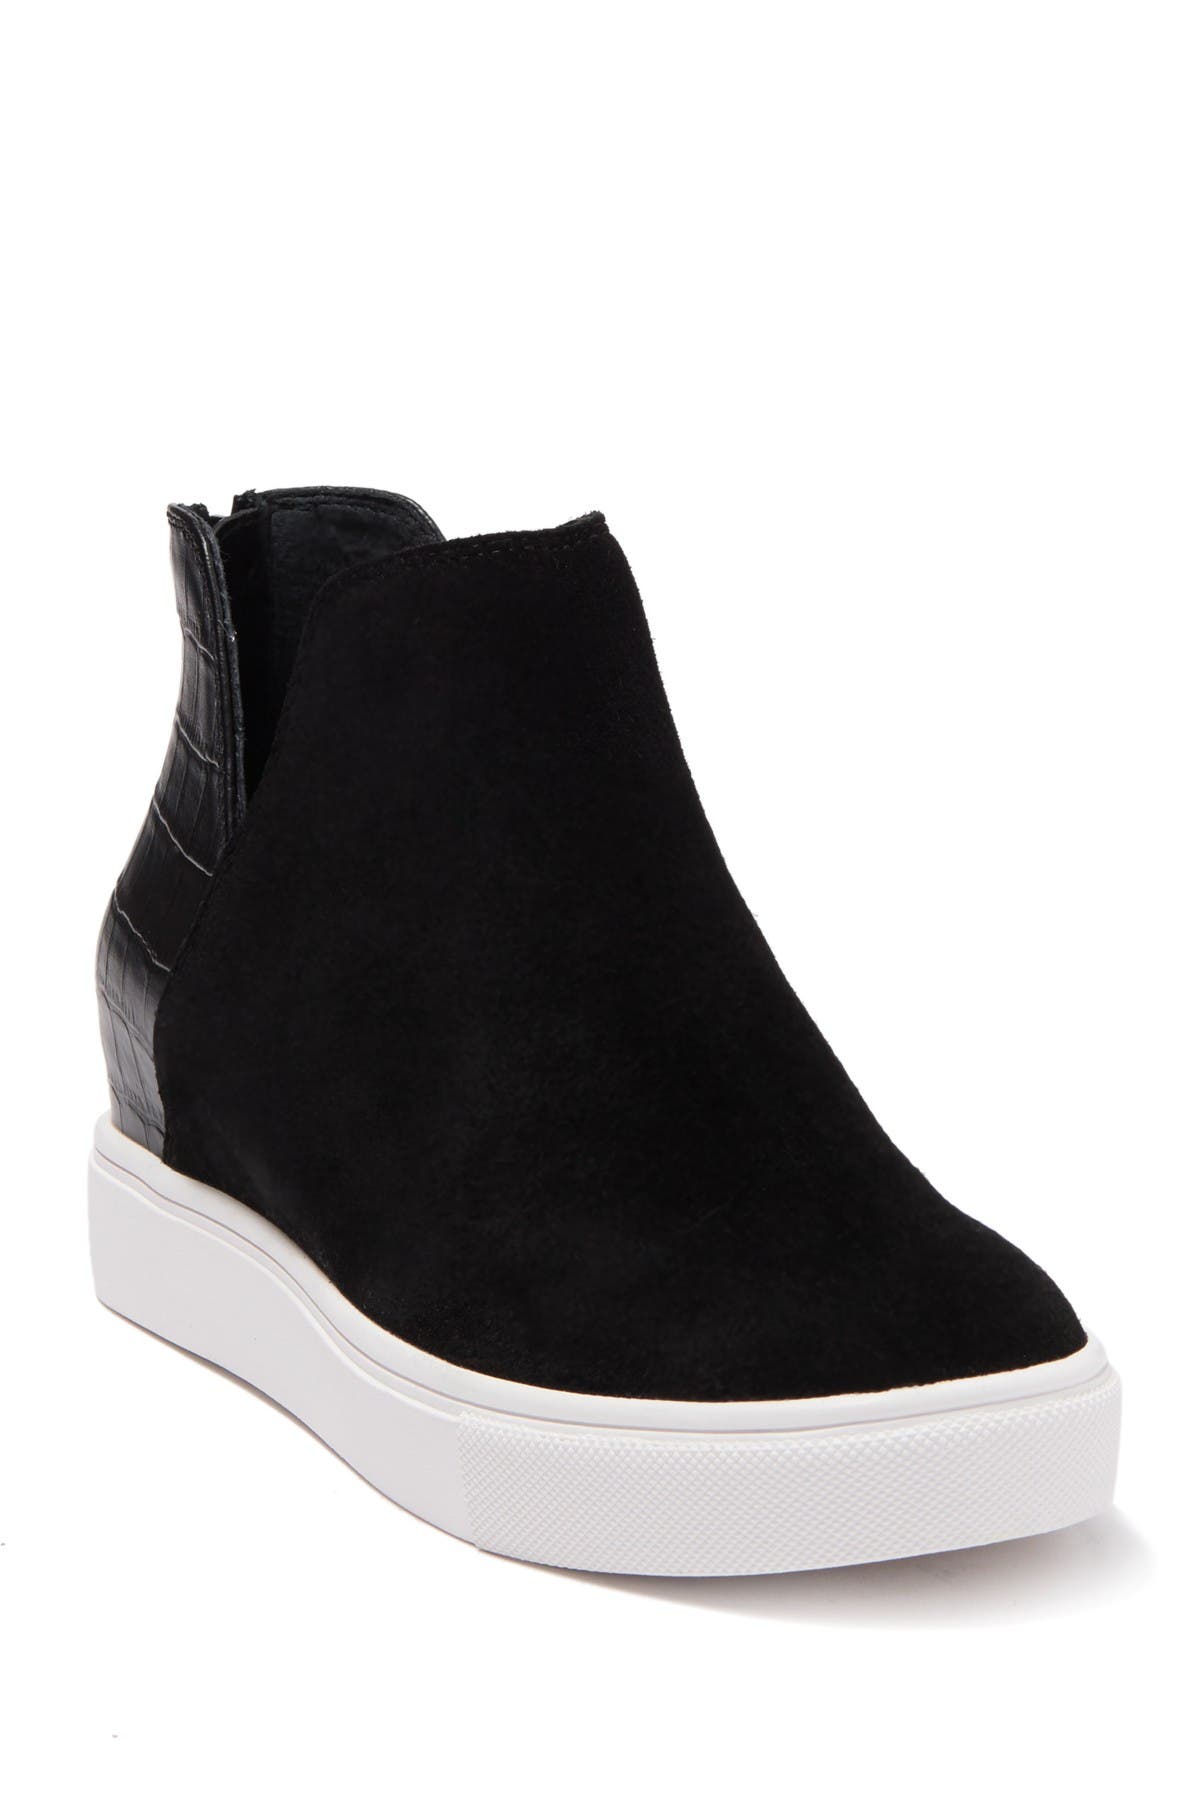 Steve Madden | Ceasar Ankle Boot 